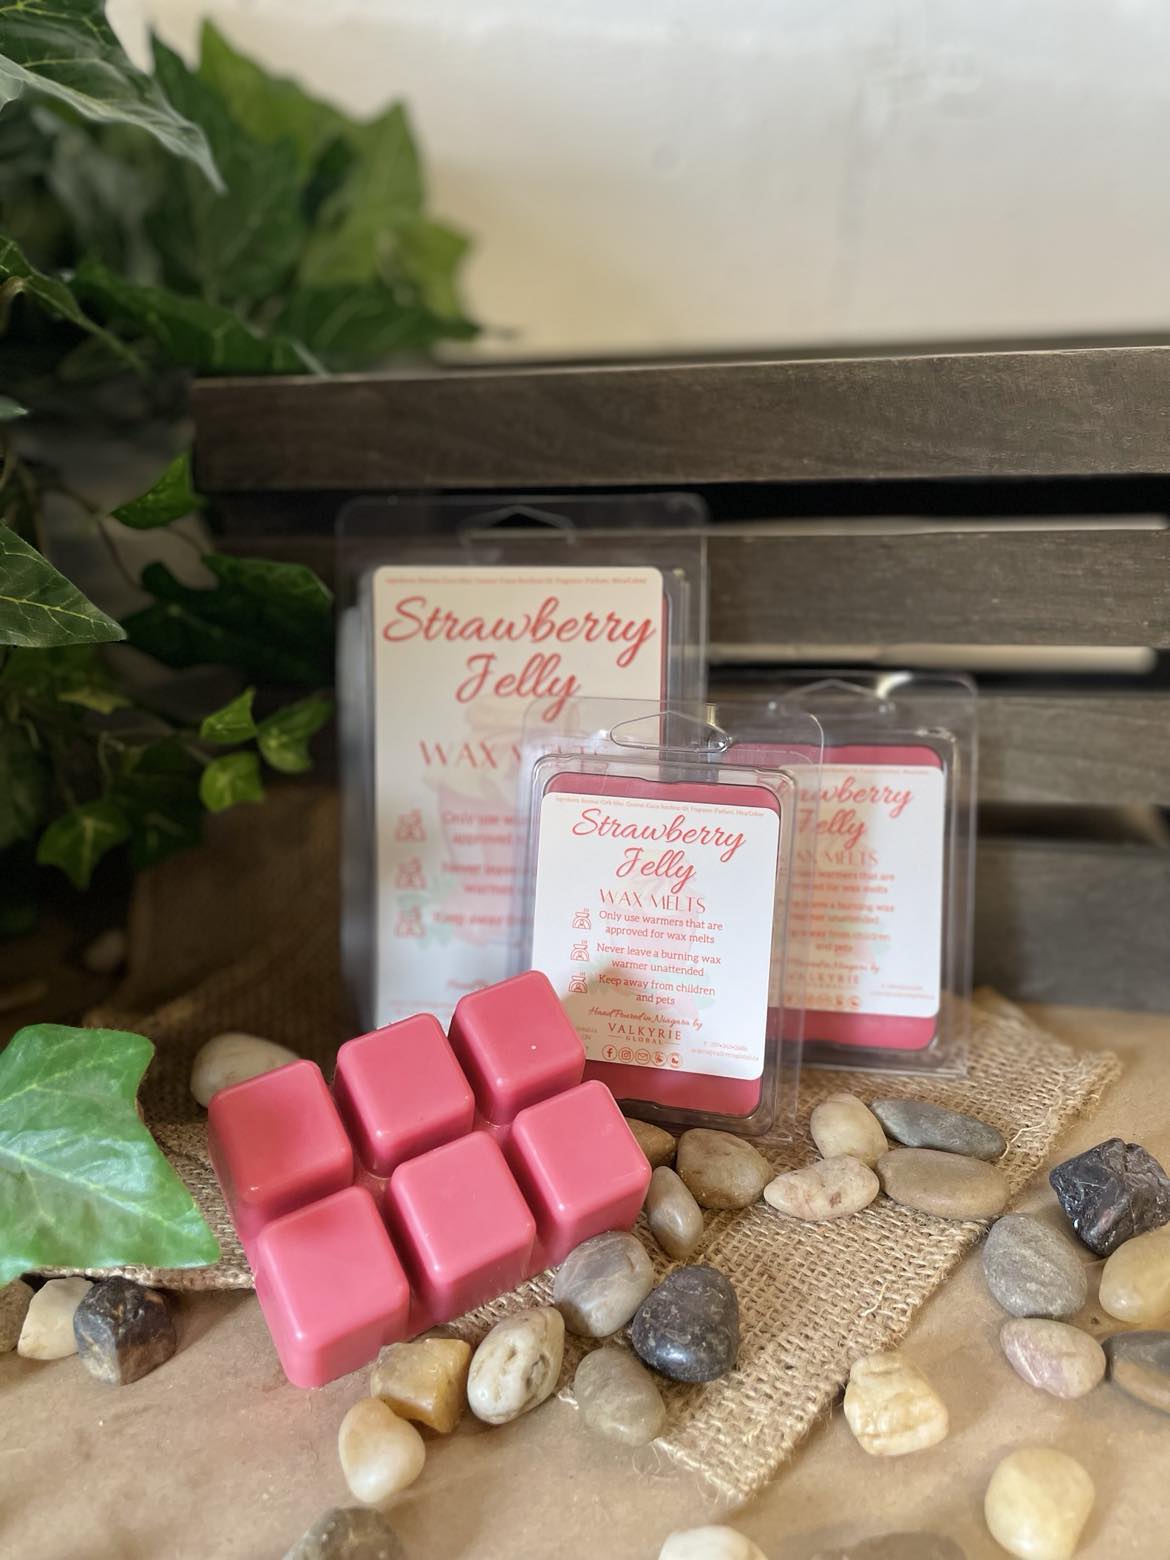 Strawberry Jelly - Wax Melts Valkyrie Global Natural Skin Care